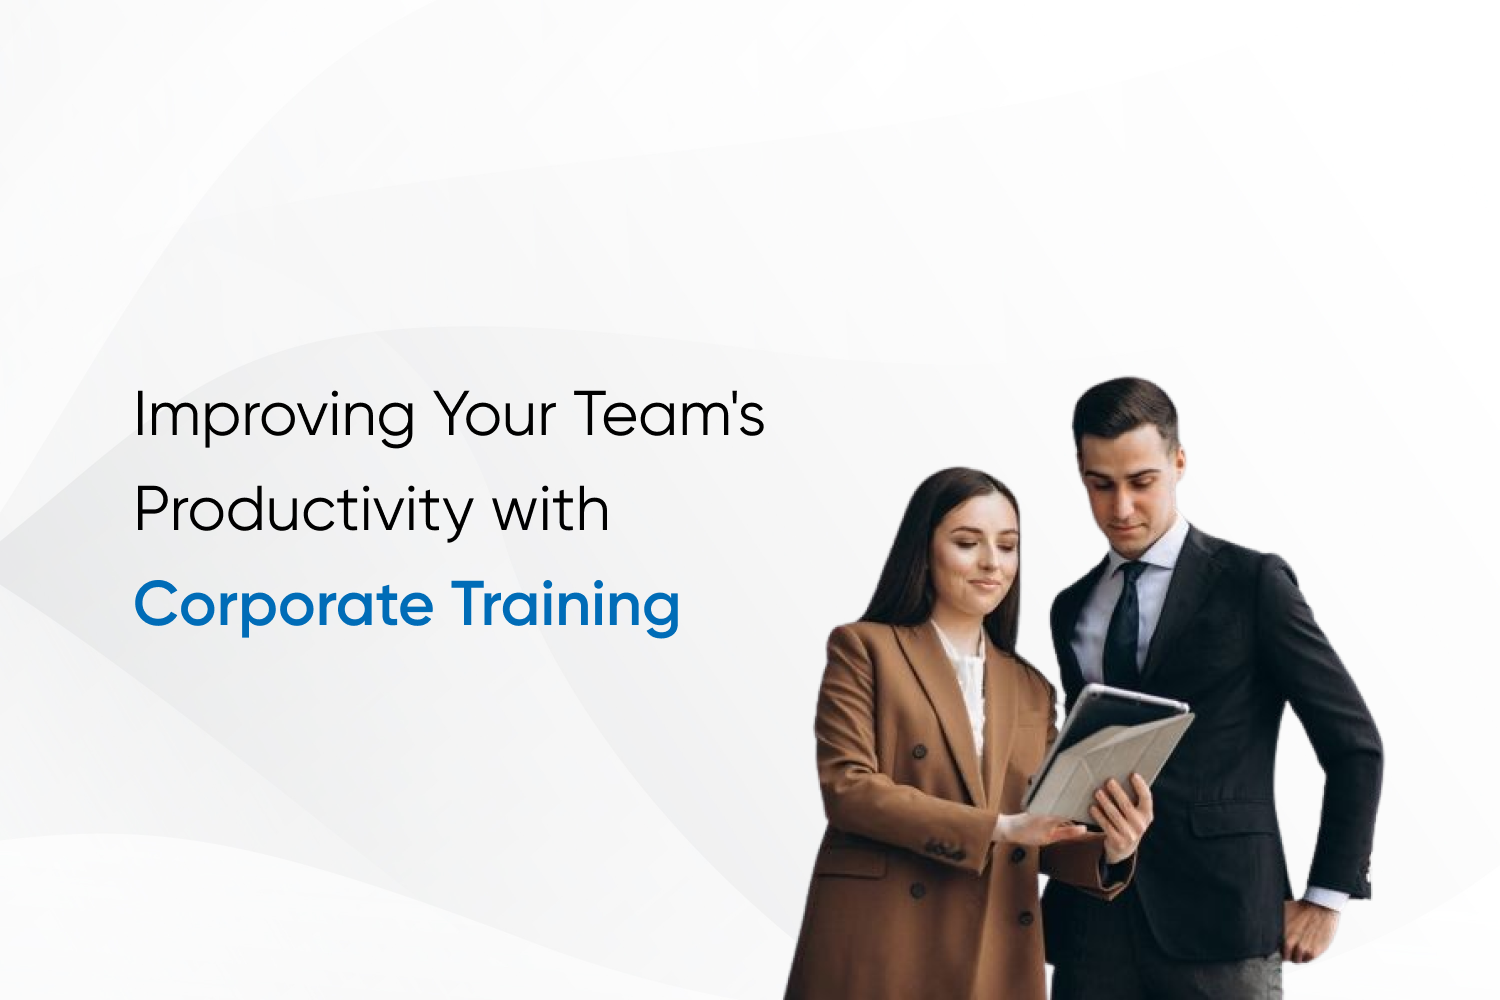 Improving Your Team's Productivity with Corporate Training